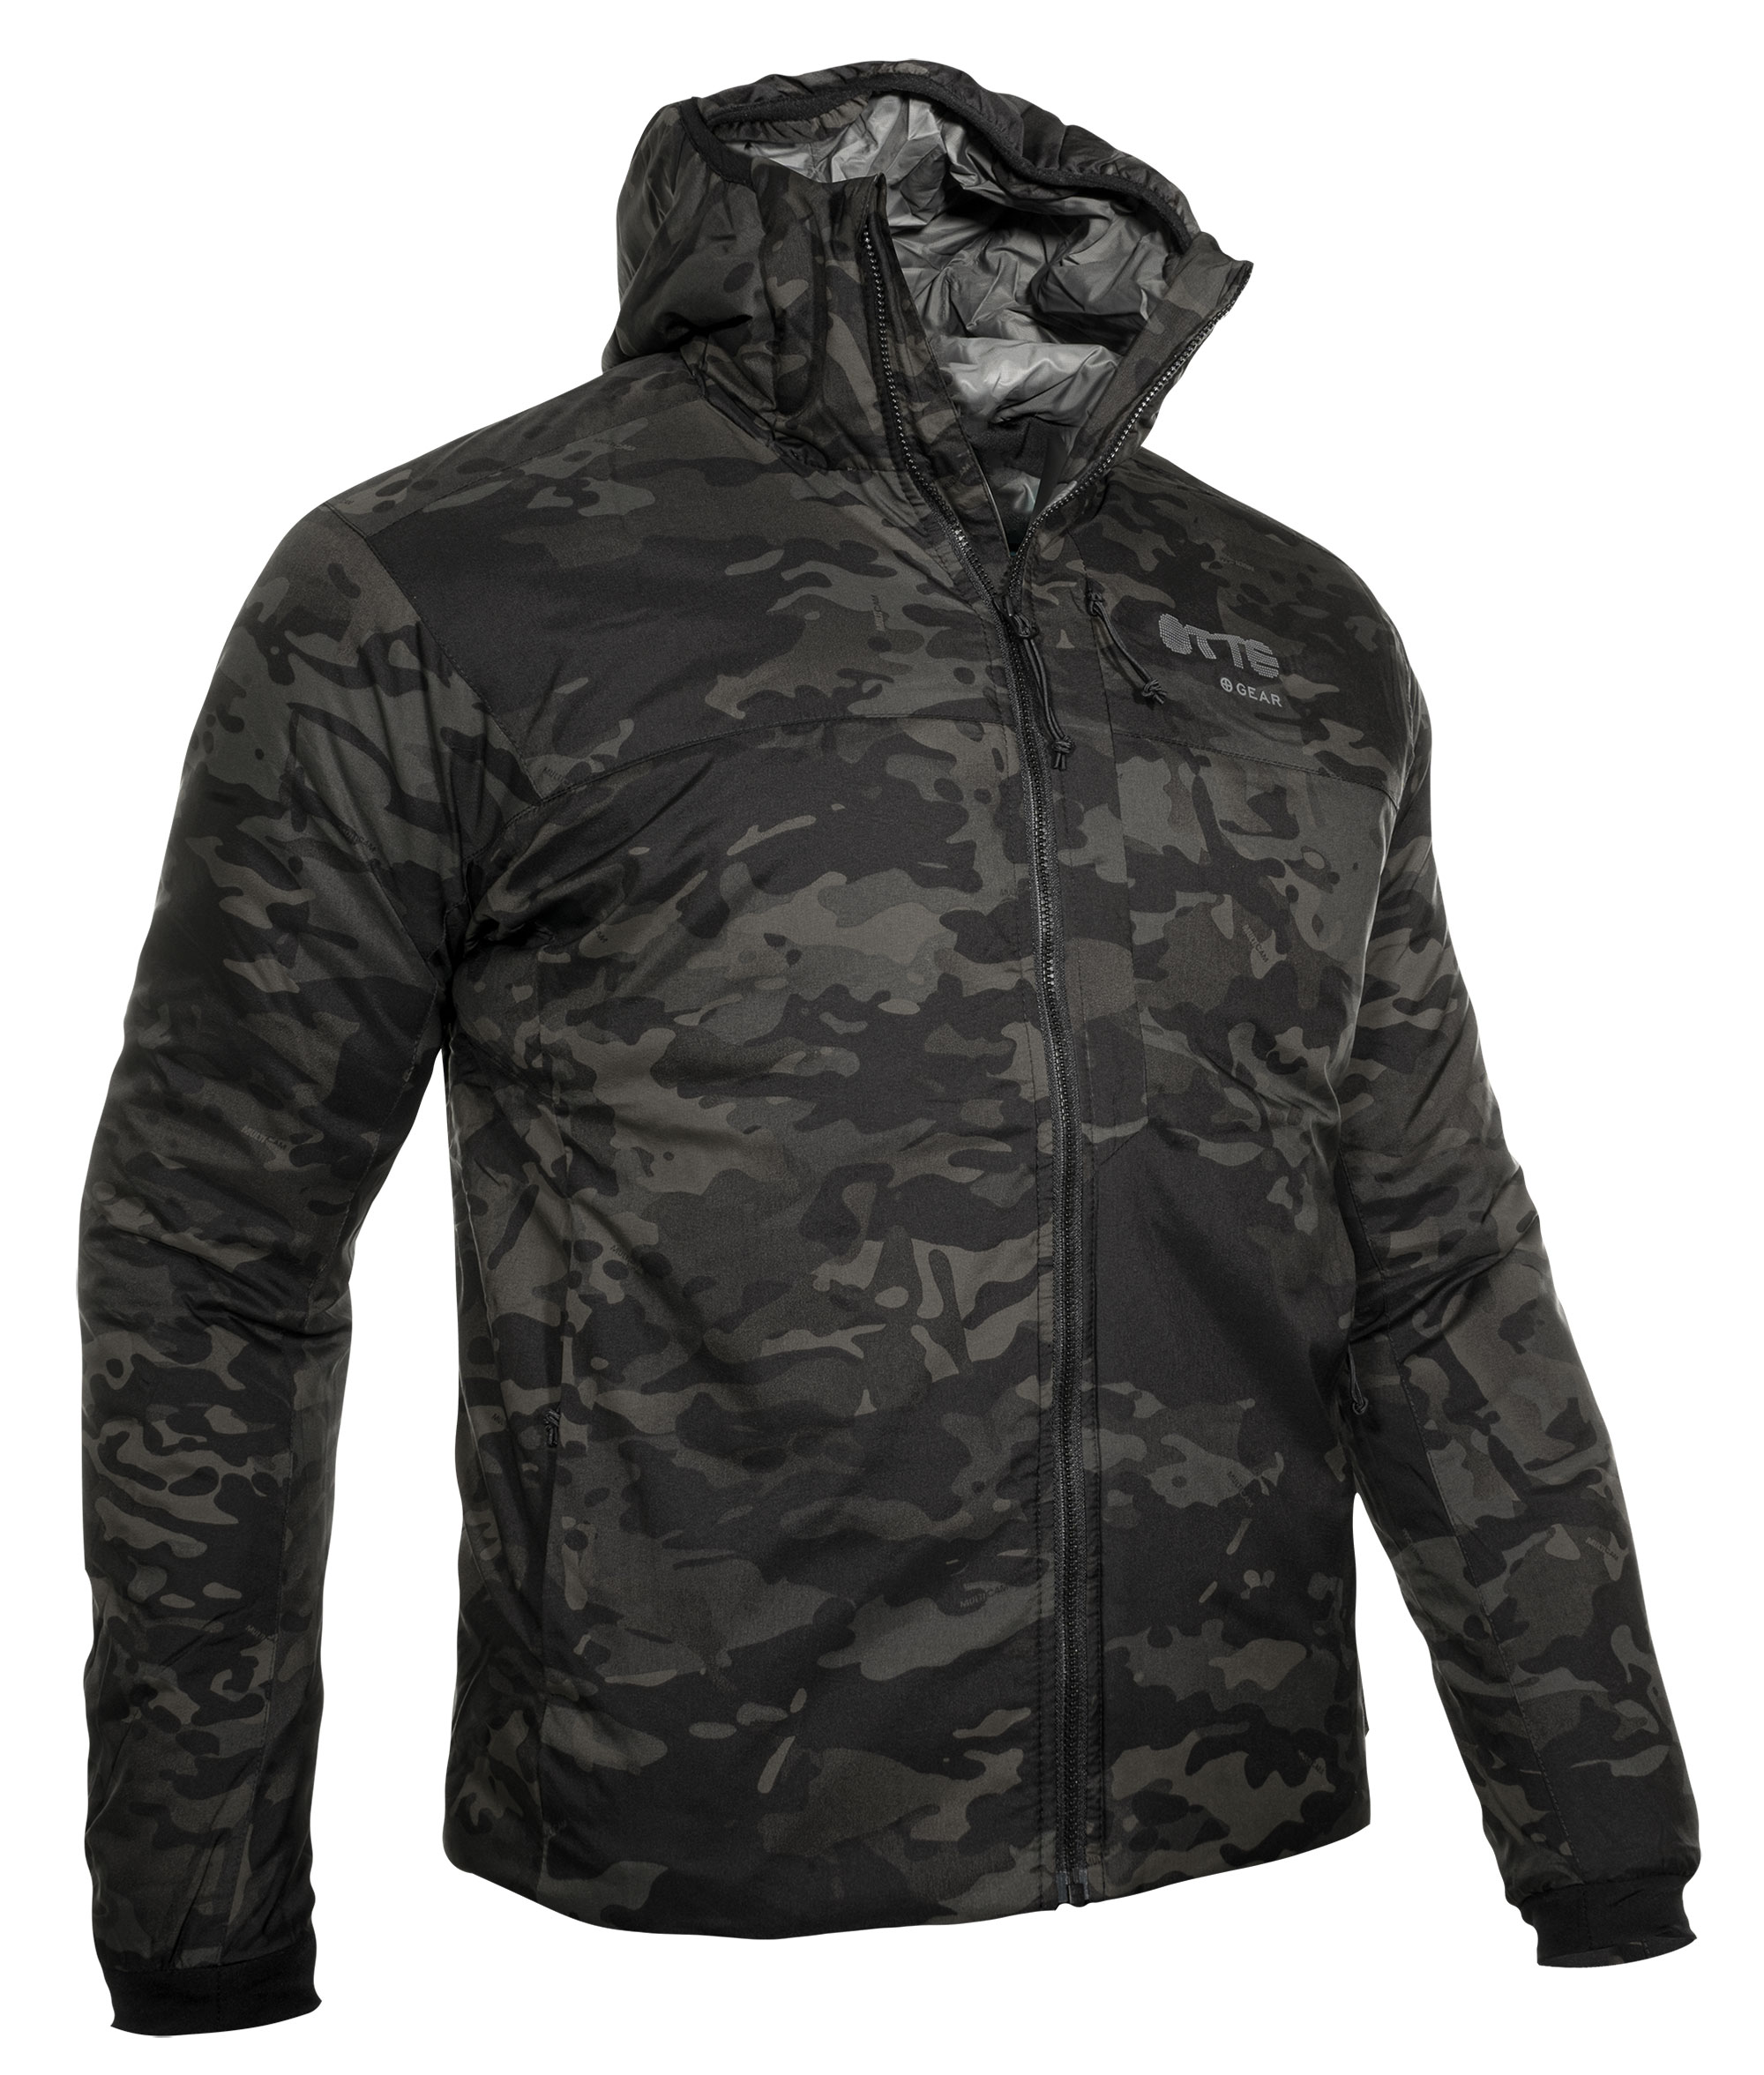 Otte Gear LV Insulated Hoody Hooded Jacket MultiCam | Recon Company